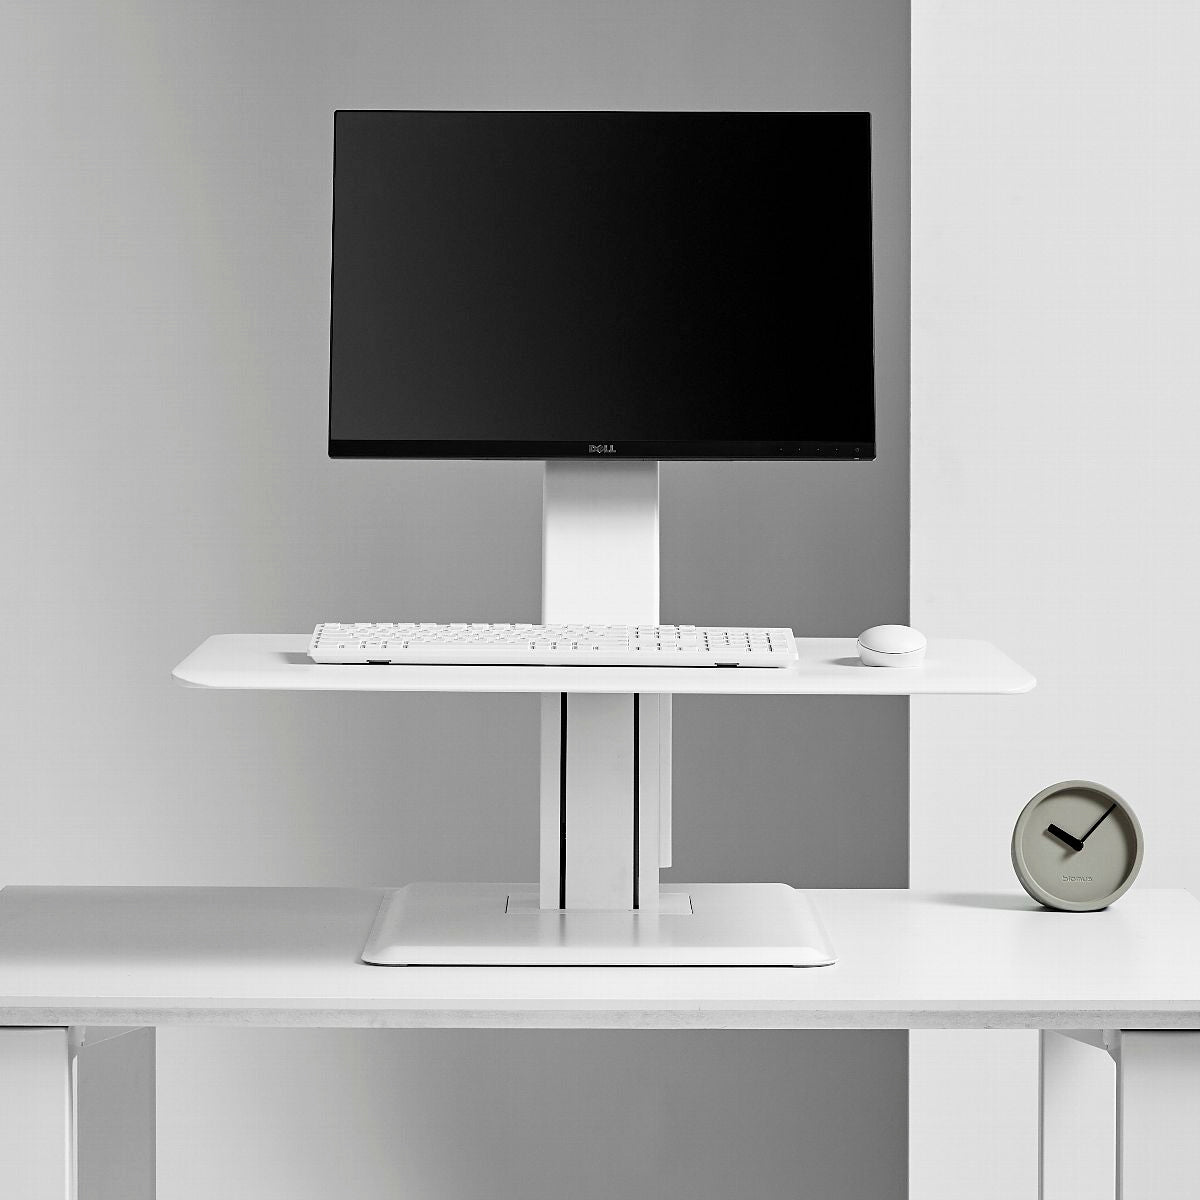 Humanscale - Humanscale Quickstand Eco - Duckys Office Furniture